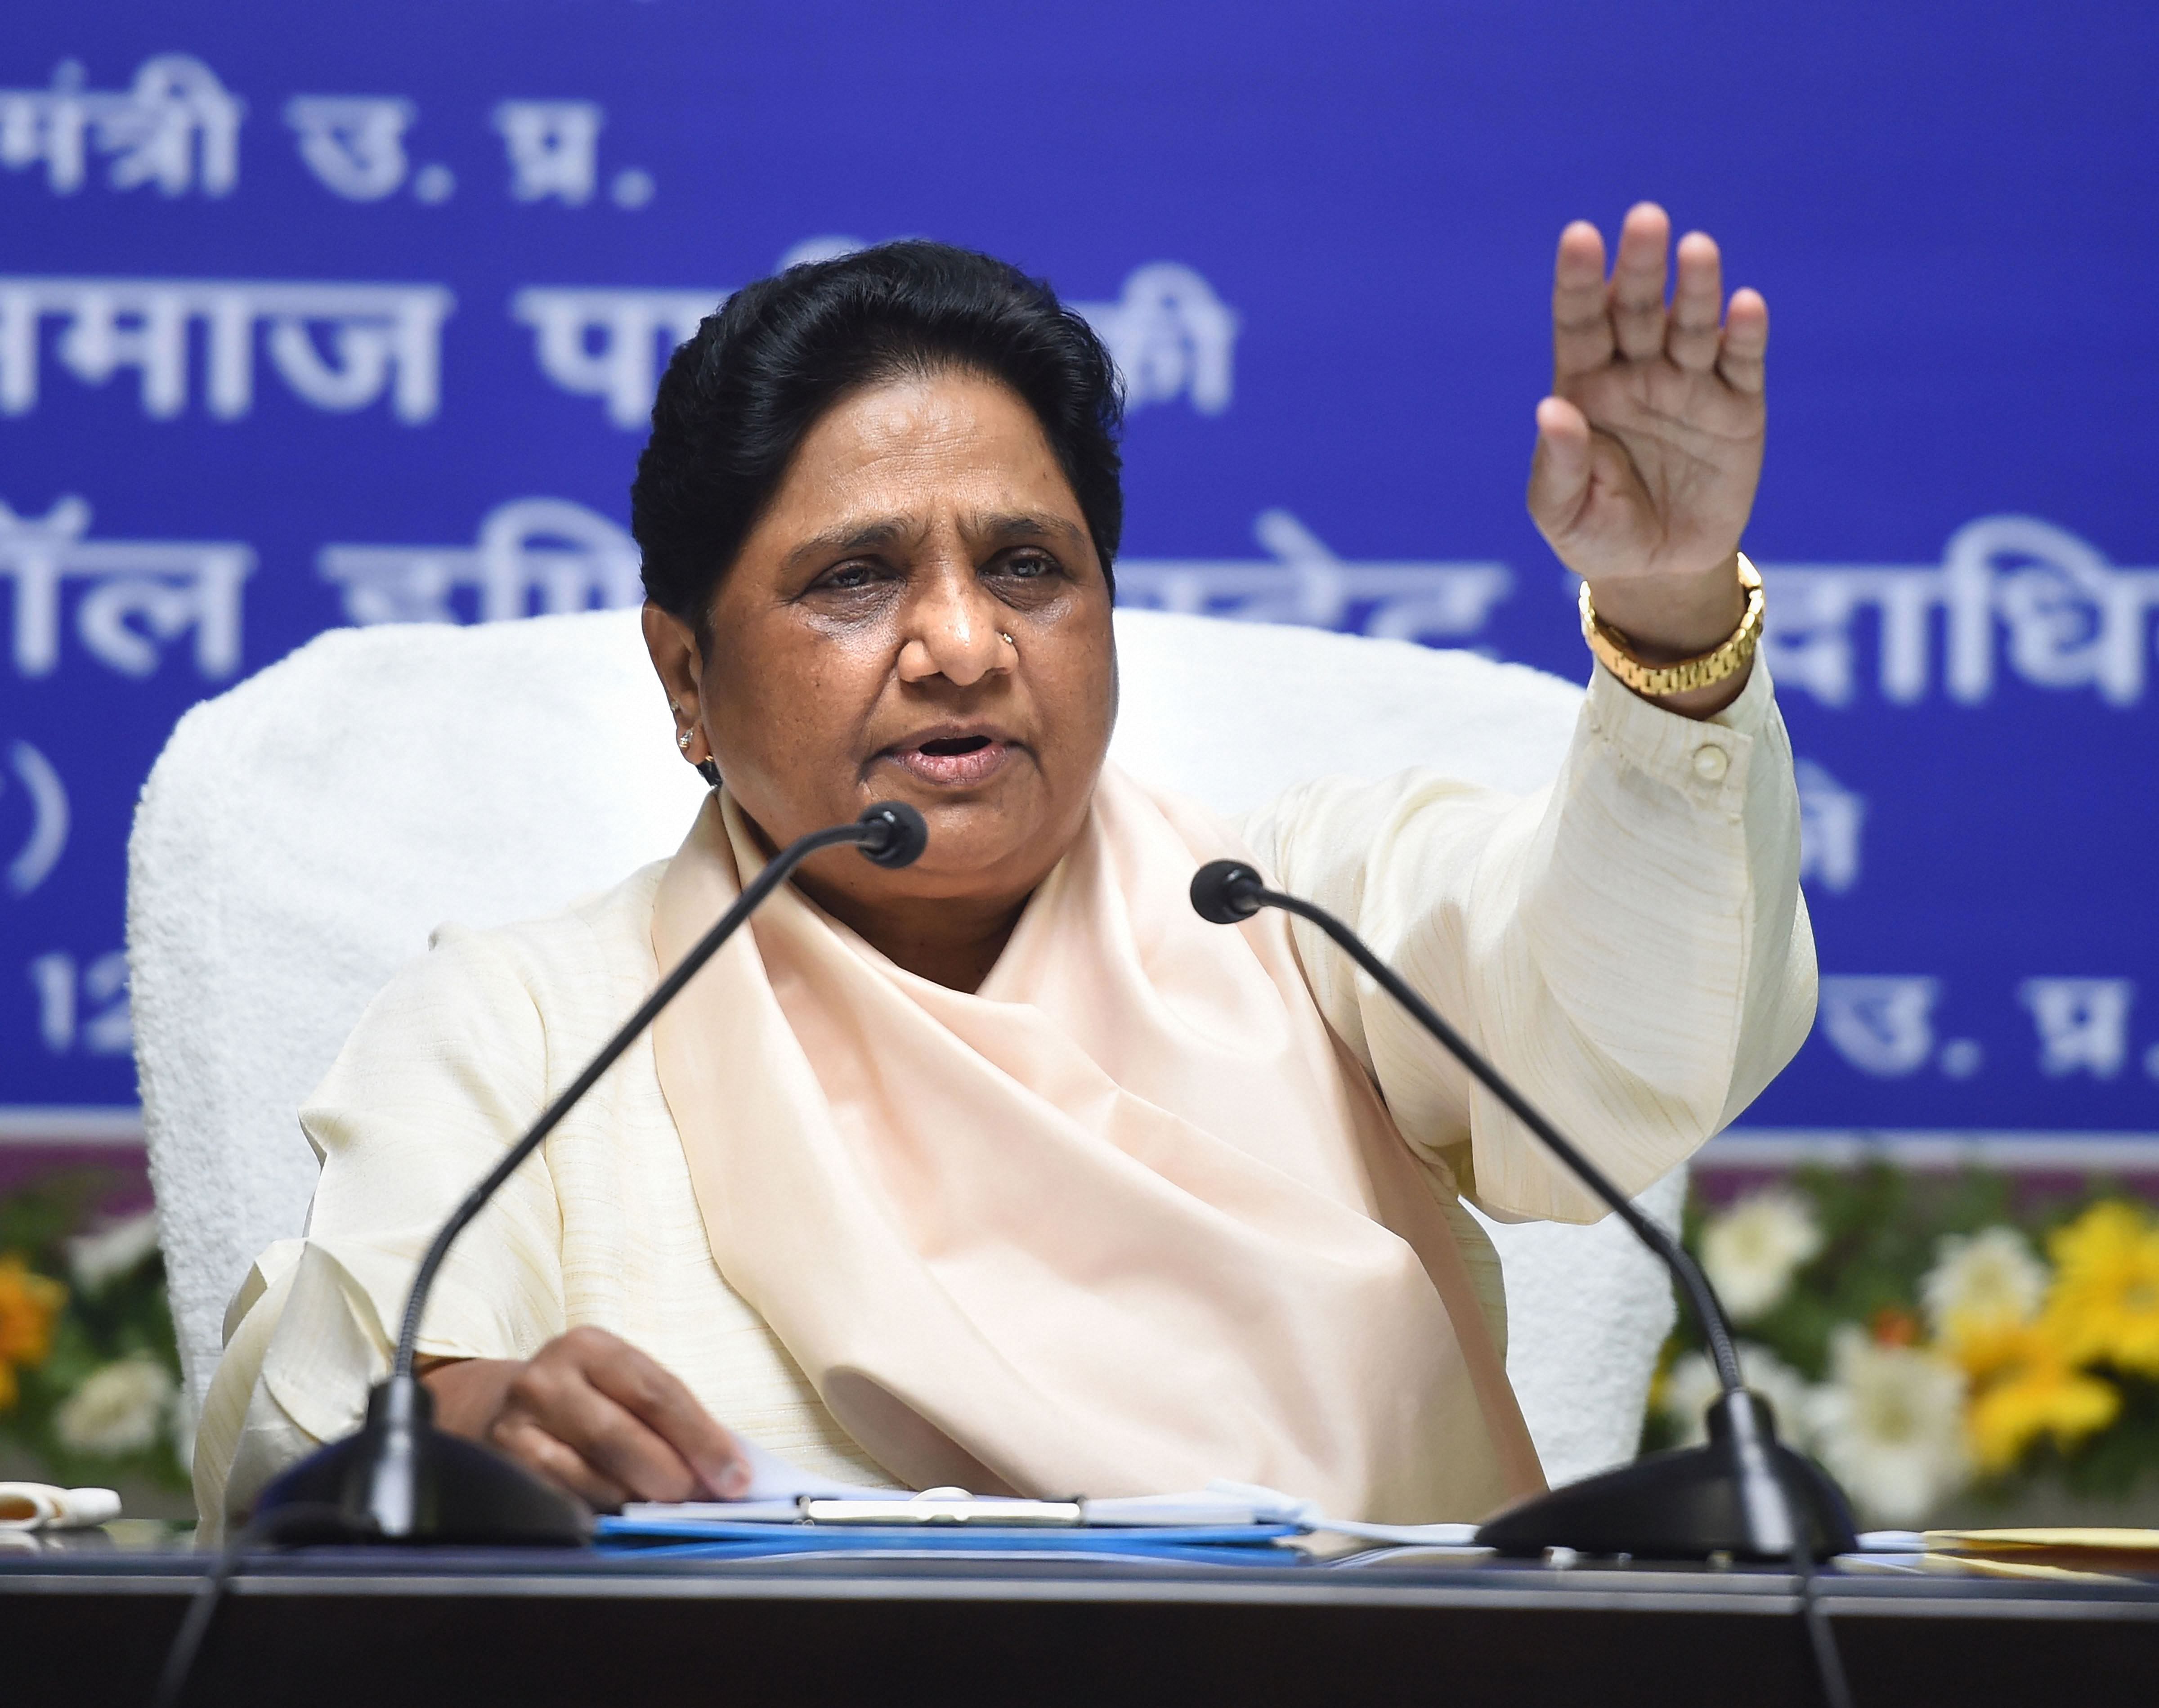 Bahujan Samaj Party (BSP) supremo Mayawati addresses the party workers during a meeting, at BSP headquarters in Lucknow. (PTI Photo)